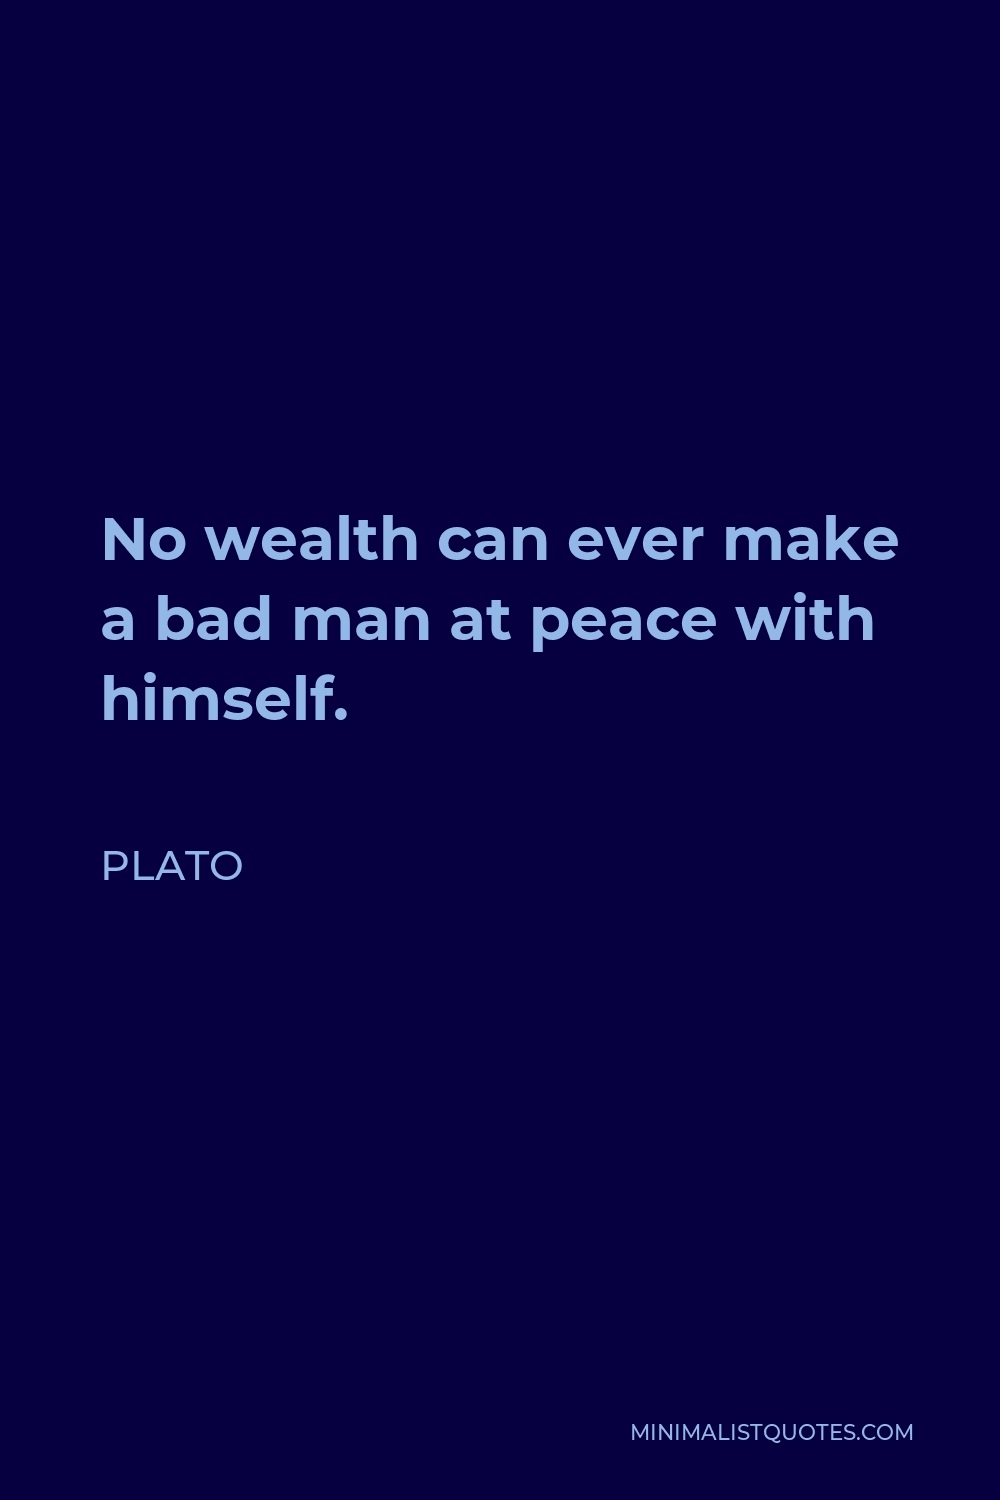 Plato Quote - No wealth can ever make a bad man at peace with himself.